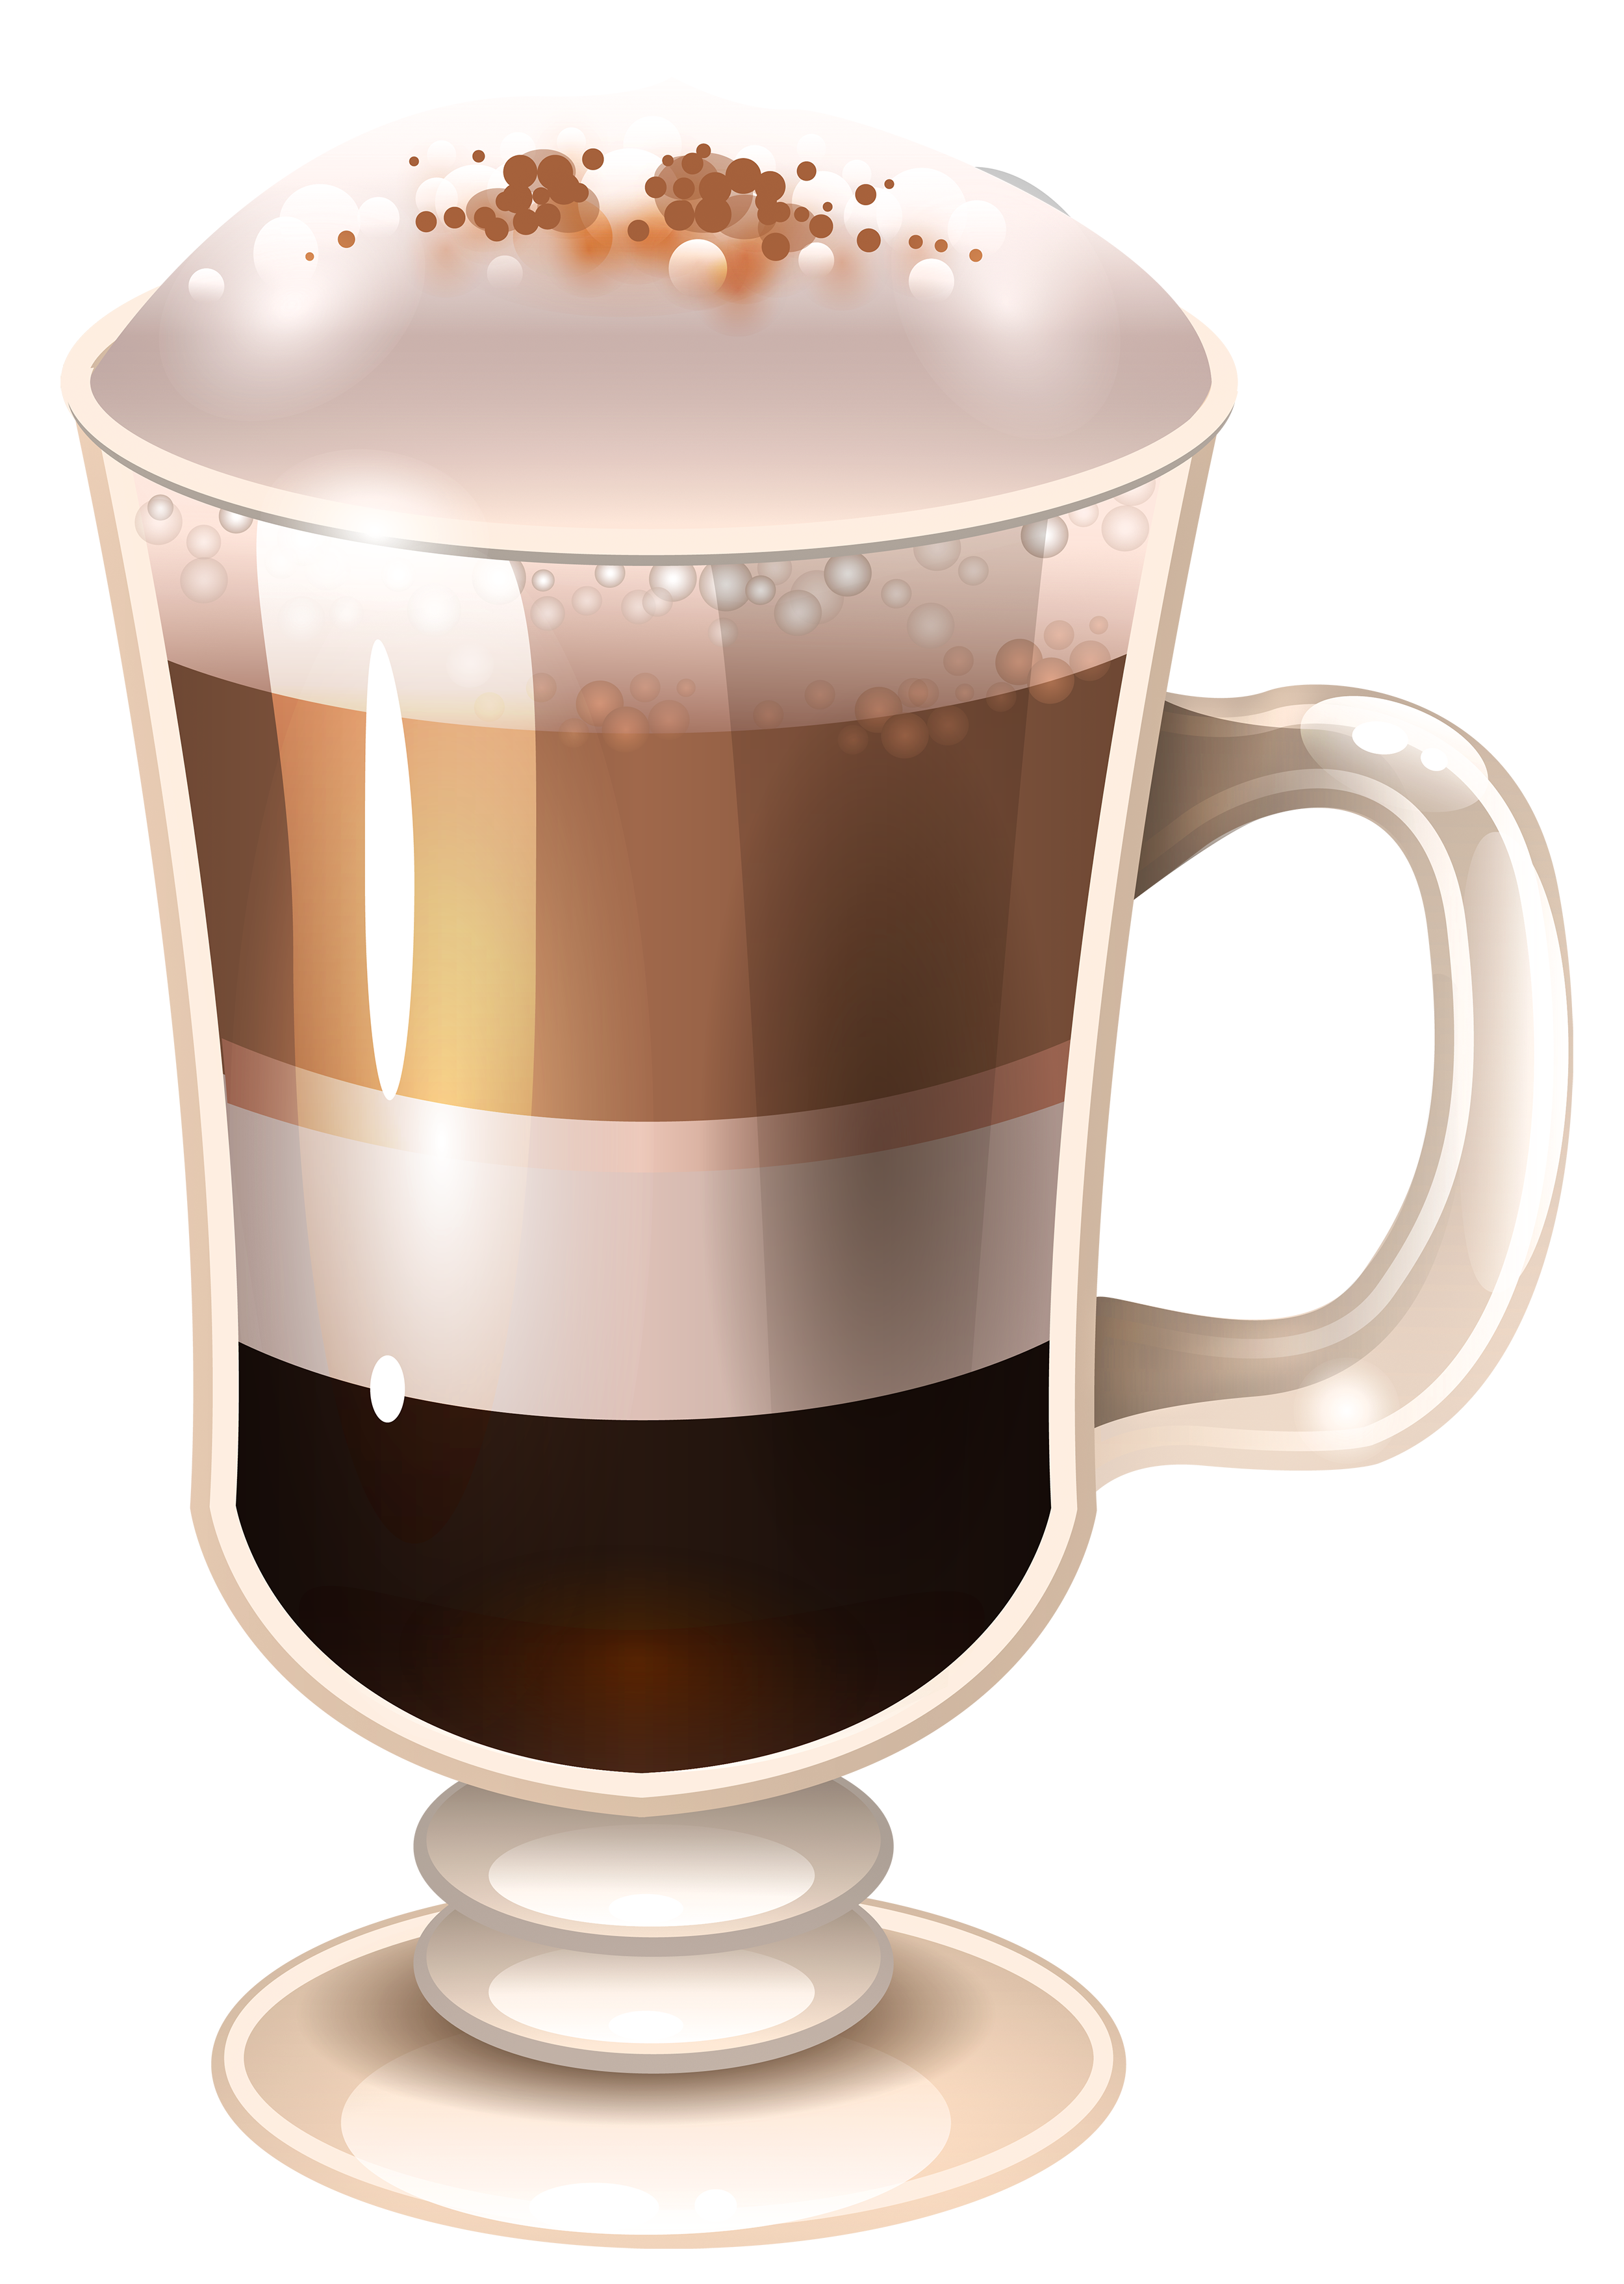 drink clipart drink coffee